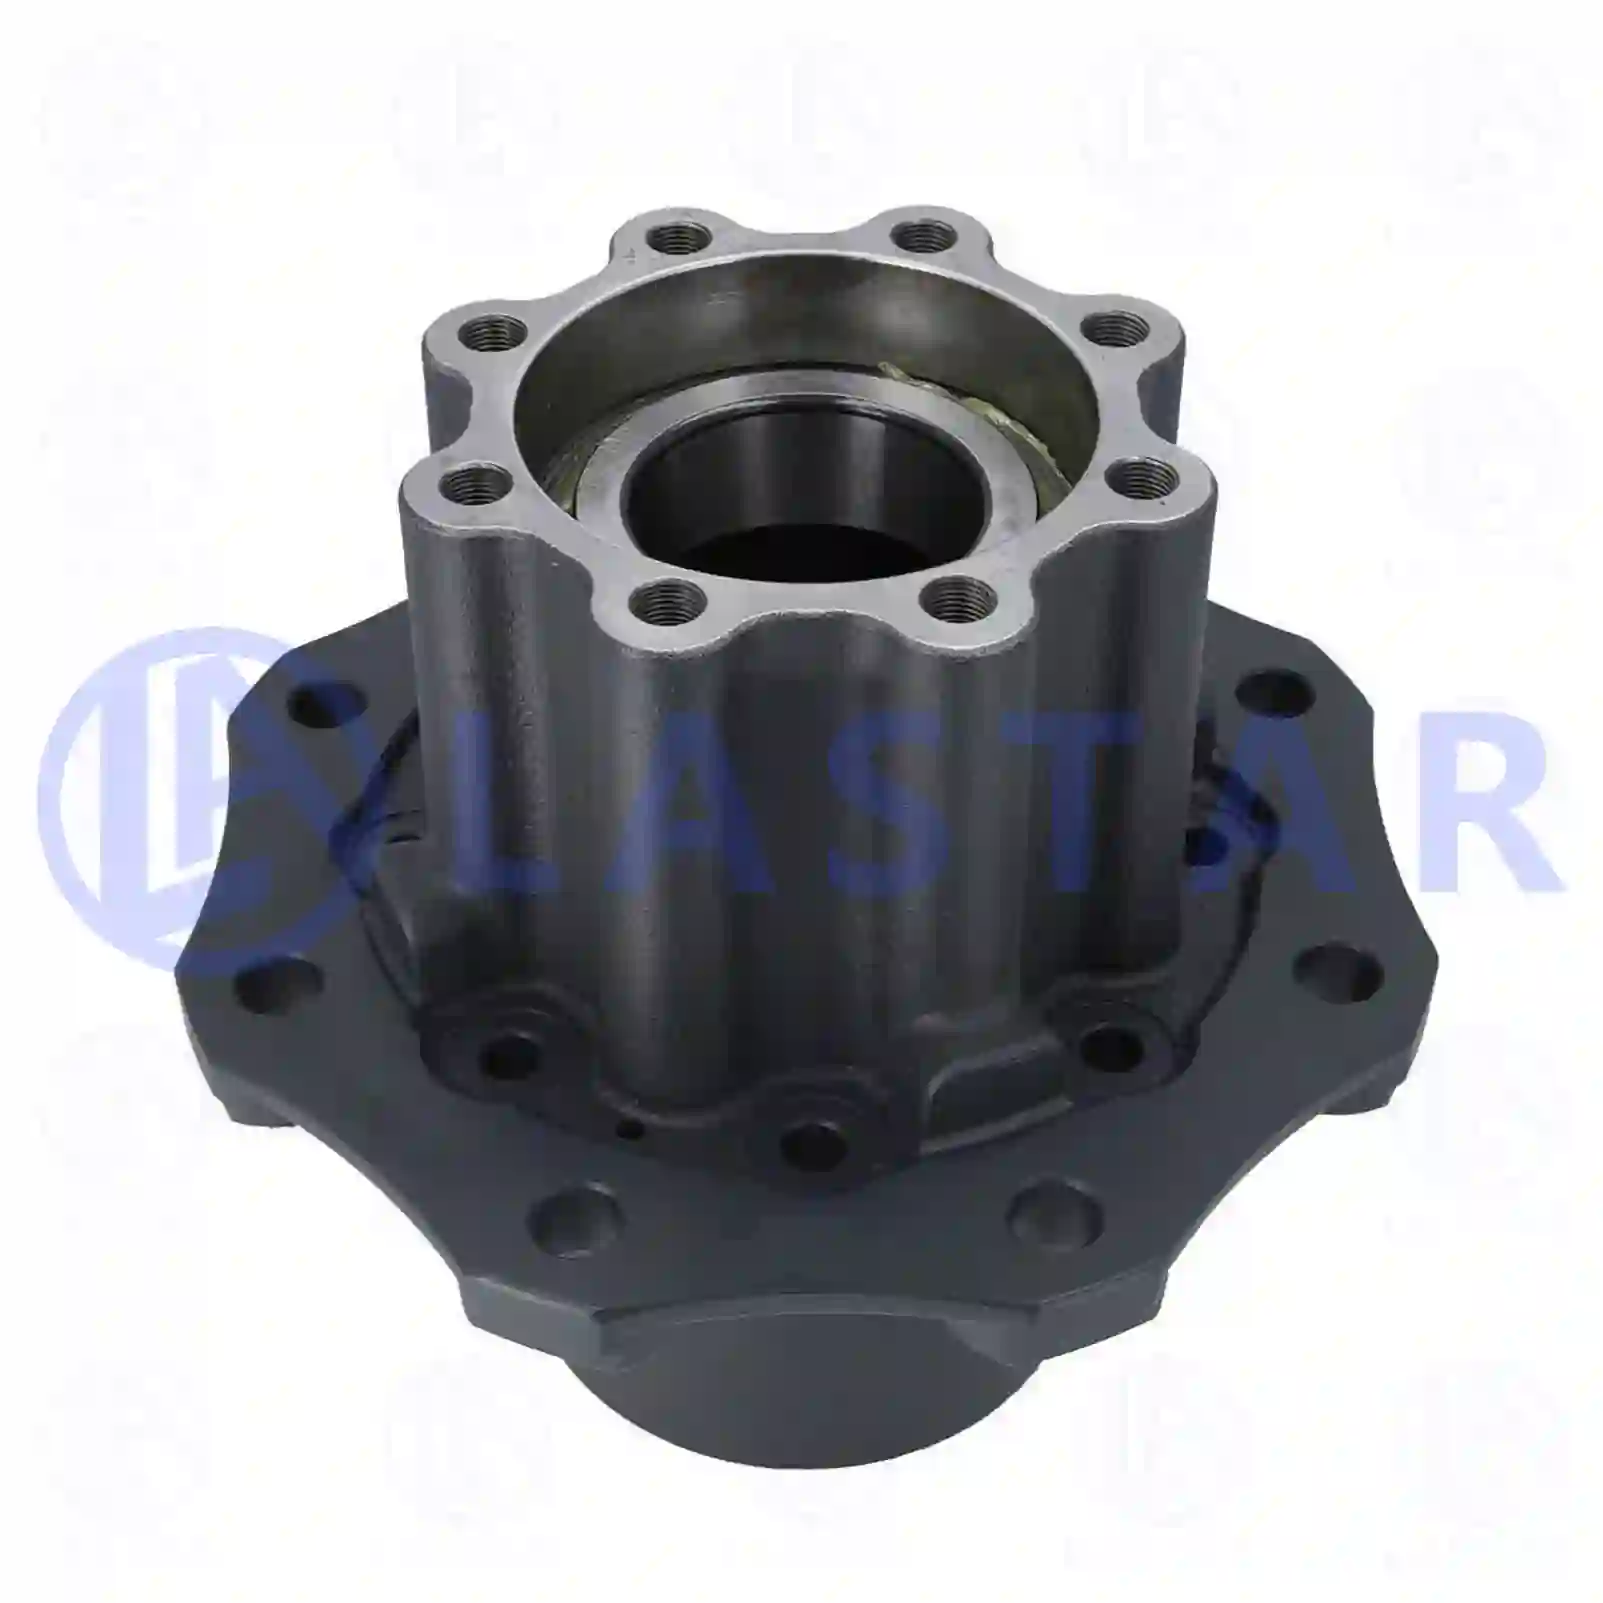 Wheel hub, without bearings, 77726364, 9763561101, 9763561801, , , , ||  77726364 Lastar Spare Part | Truck Spare Parts, Auotomotive Spare Parts Wheel hub, without bearings, 77726364, 9763561101, 9763561801, , , , ||  77726364 Lastar Spare Part | Truck Spare Parts, Auotomotive Spare Parts